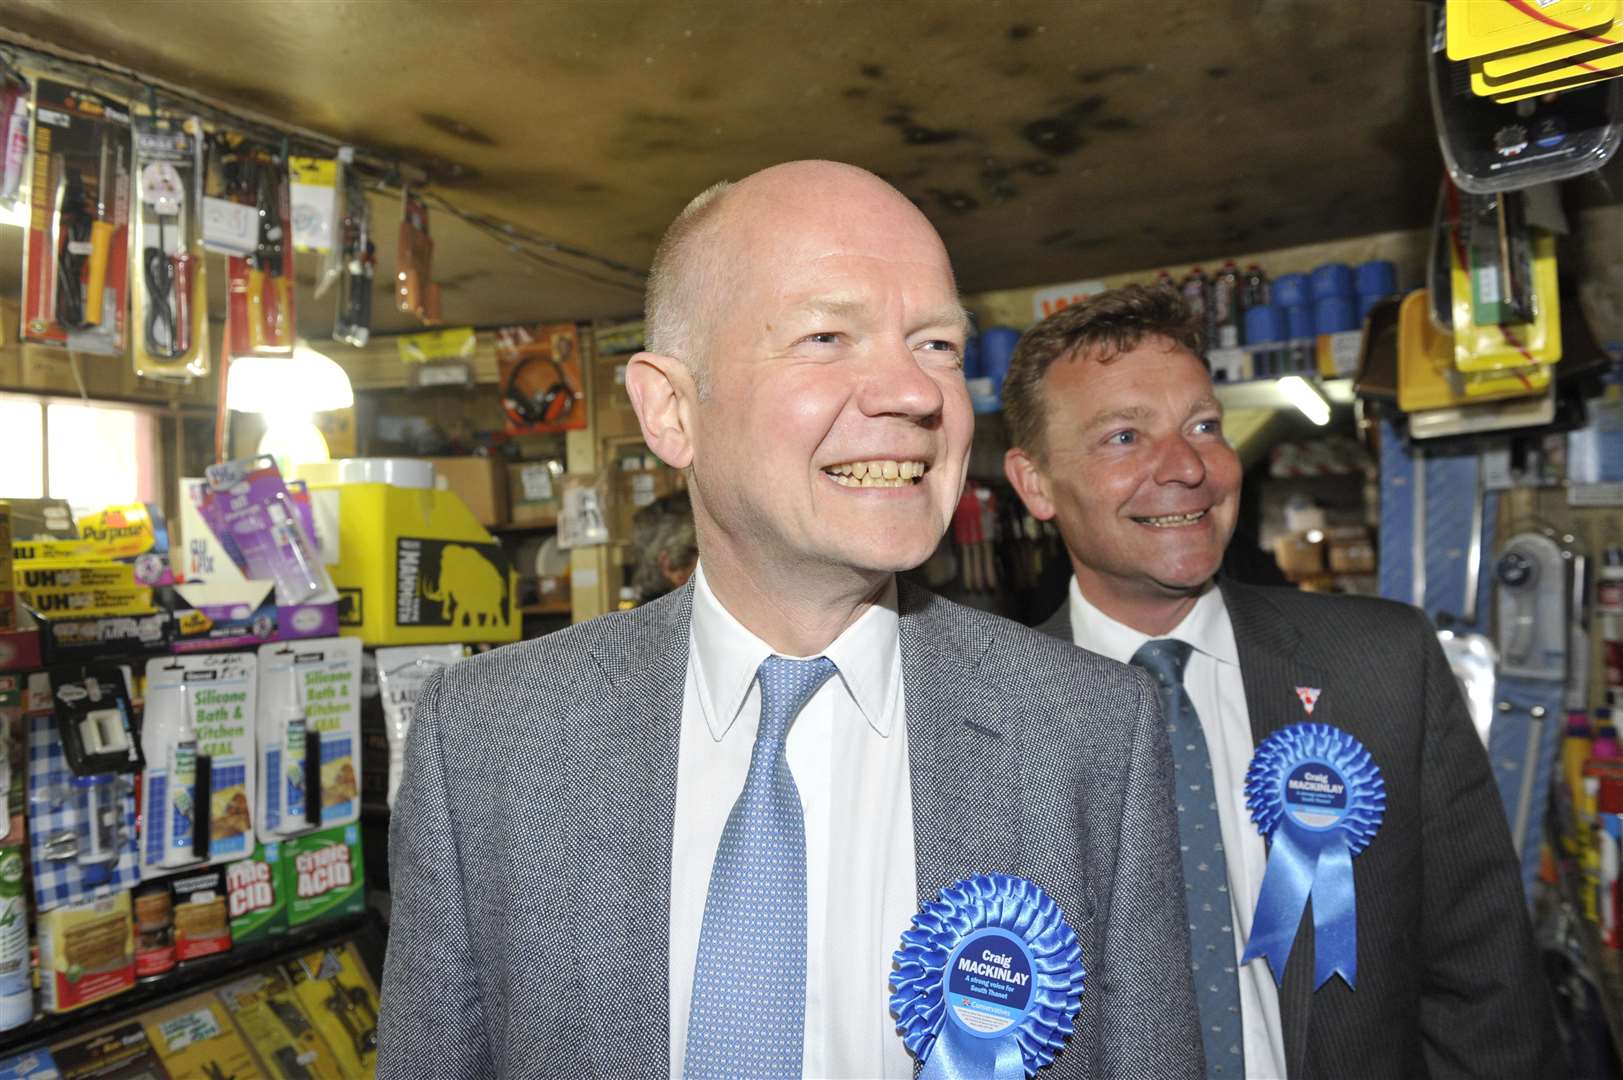 William Hague visits Broadstairs with Craig Mackinlay in 2015